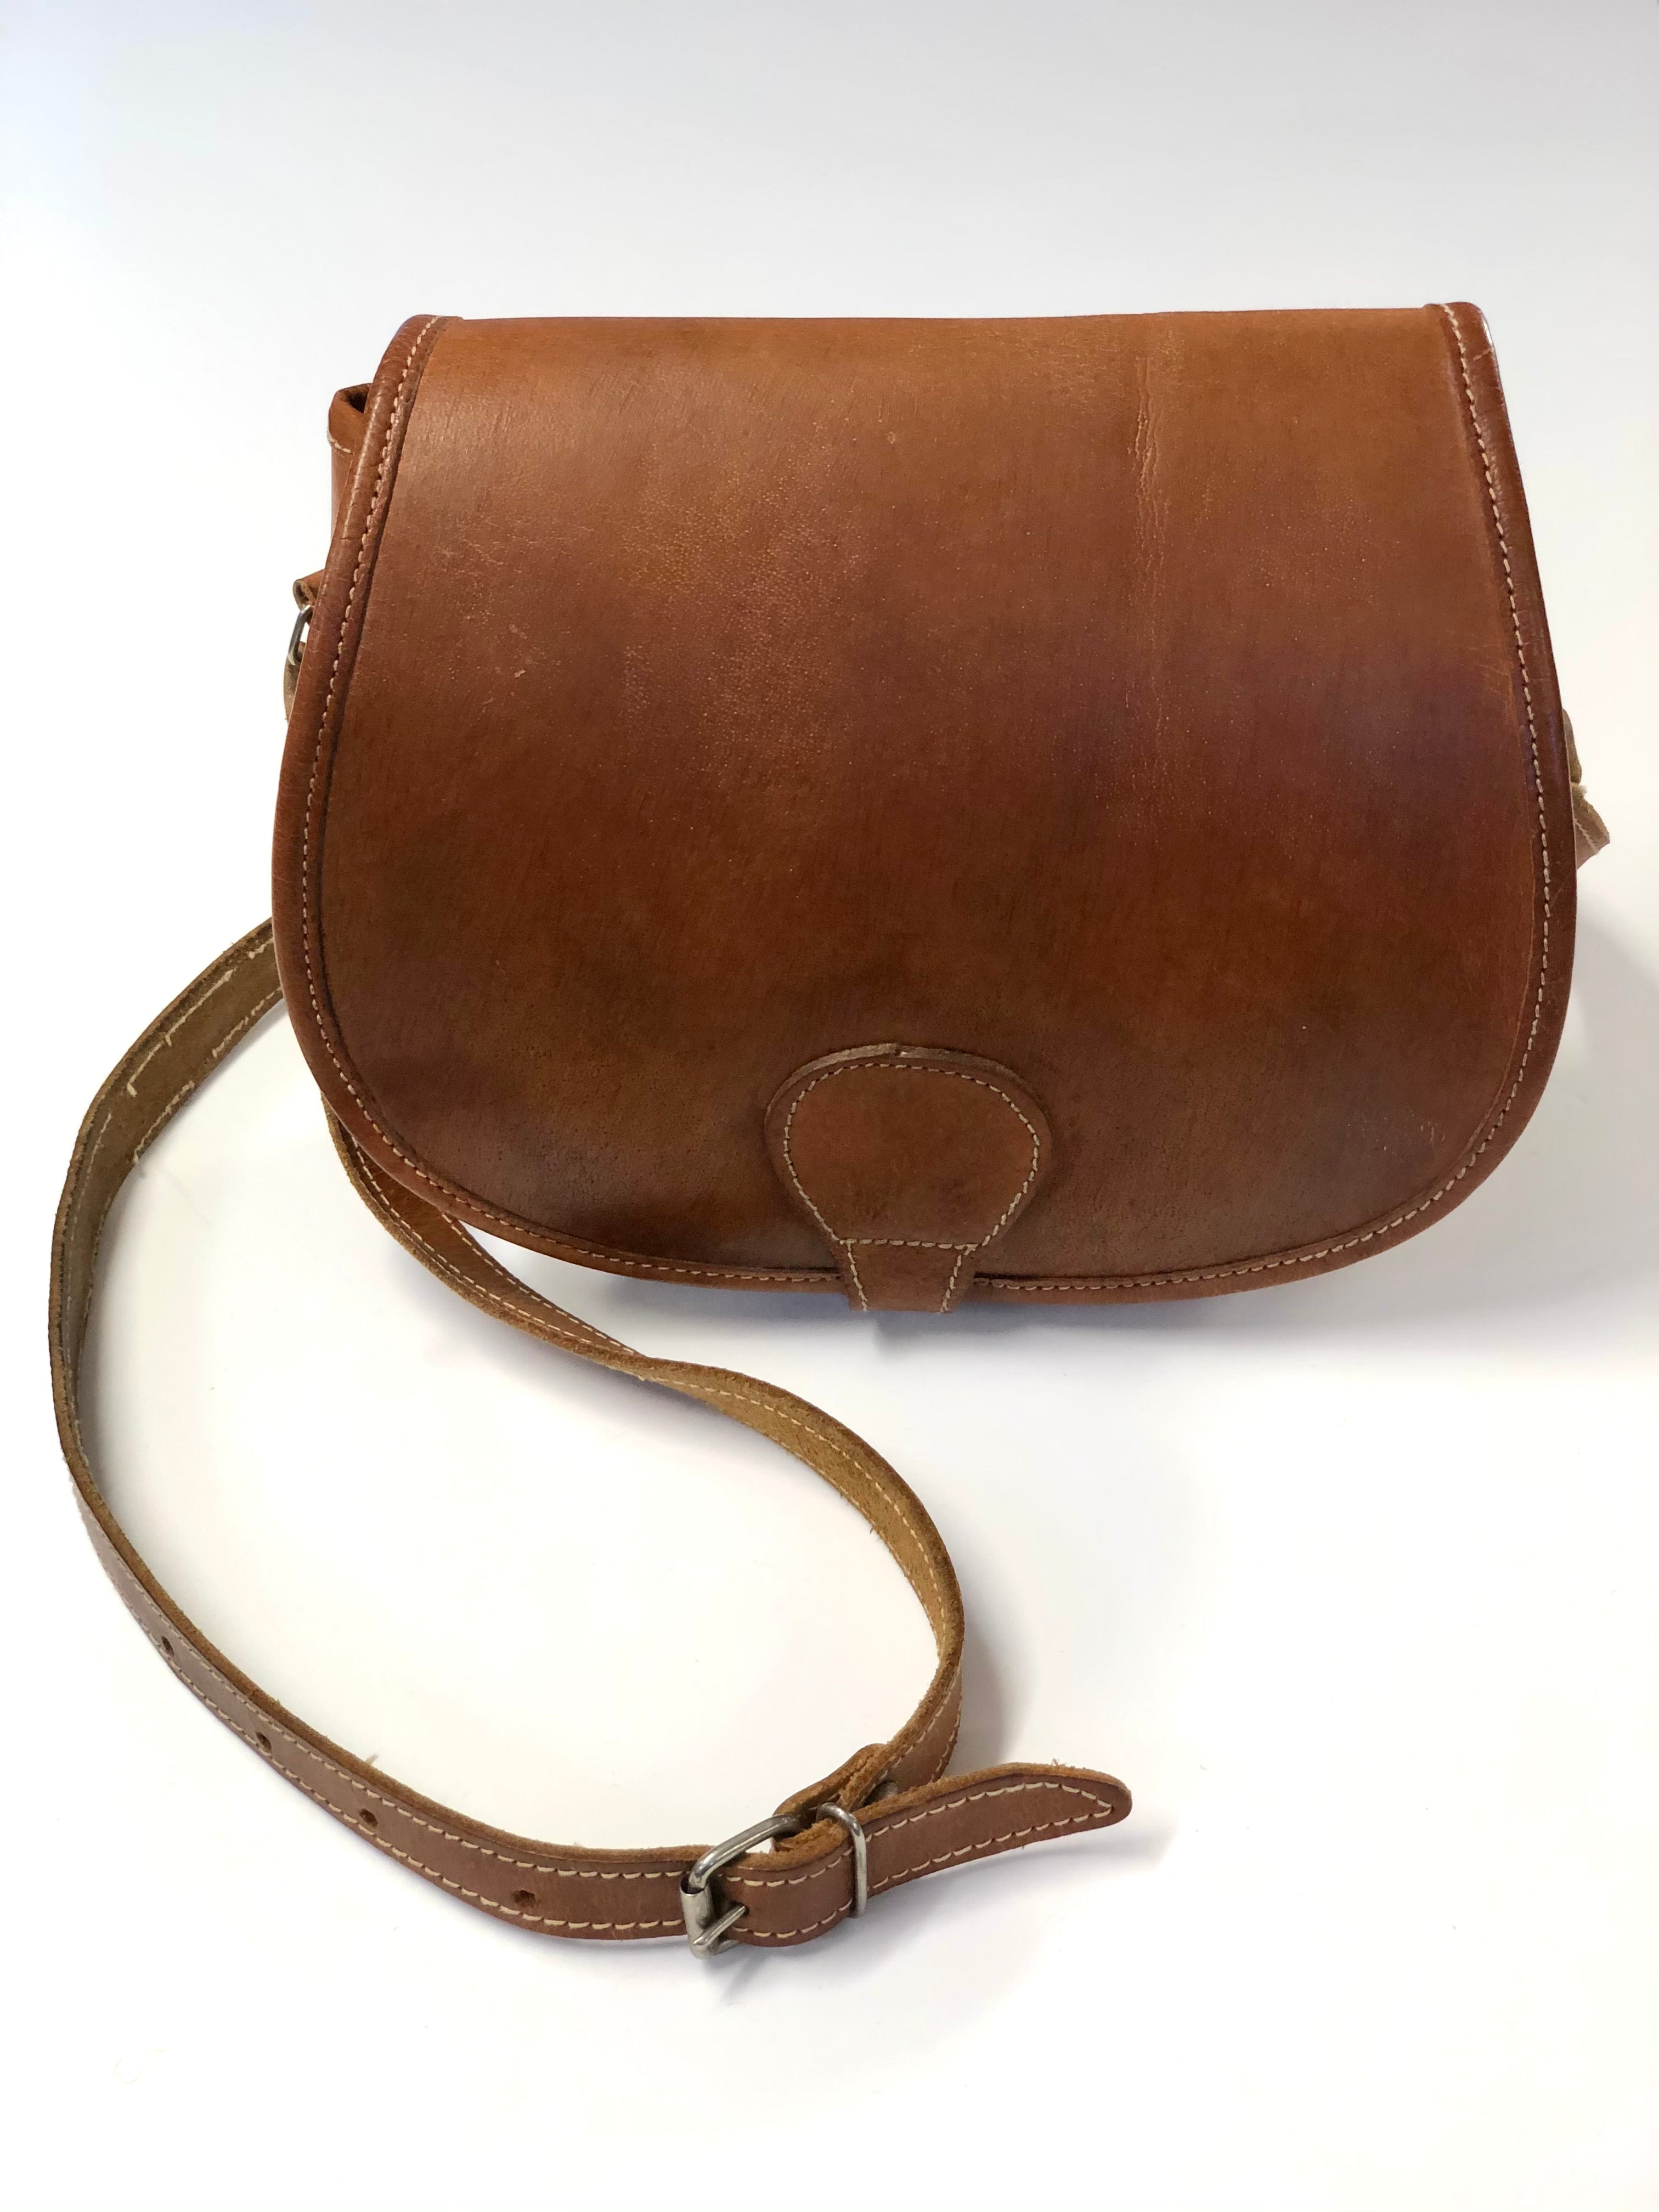 Related image  Vintage 70s bag, Leather handbags, Bags